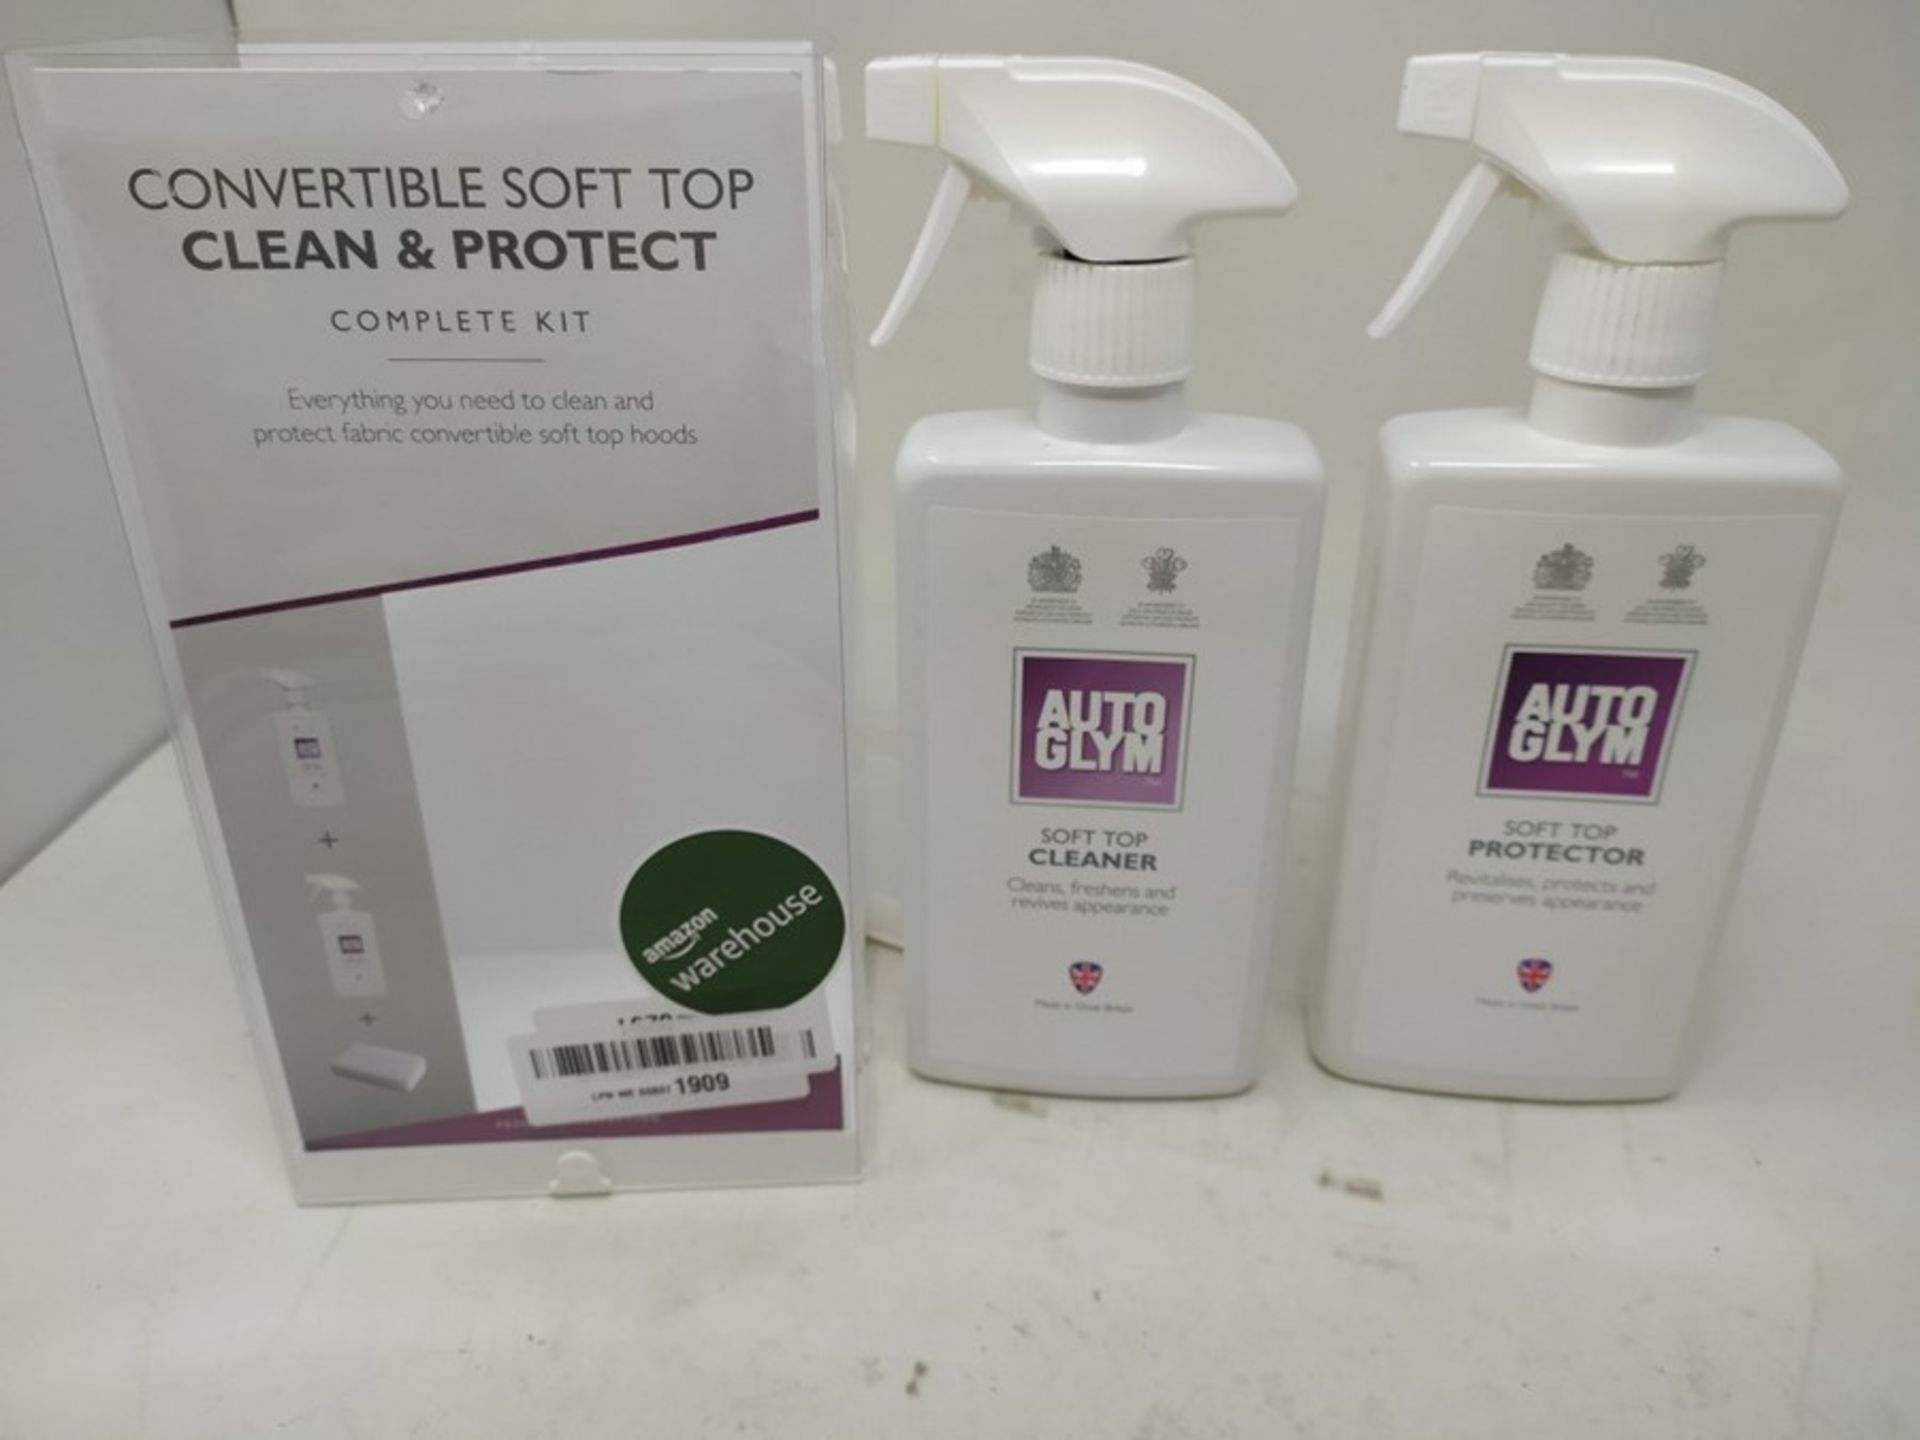 Autoglym AG 255003 Convertible Soft Top Clean & Protect Complete Kit - Image 2 of 2